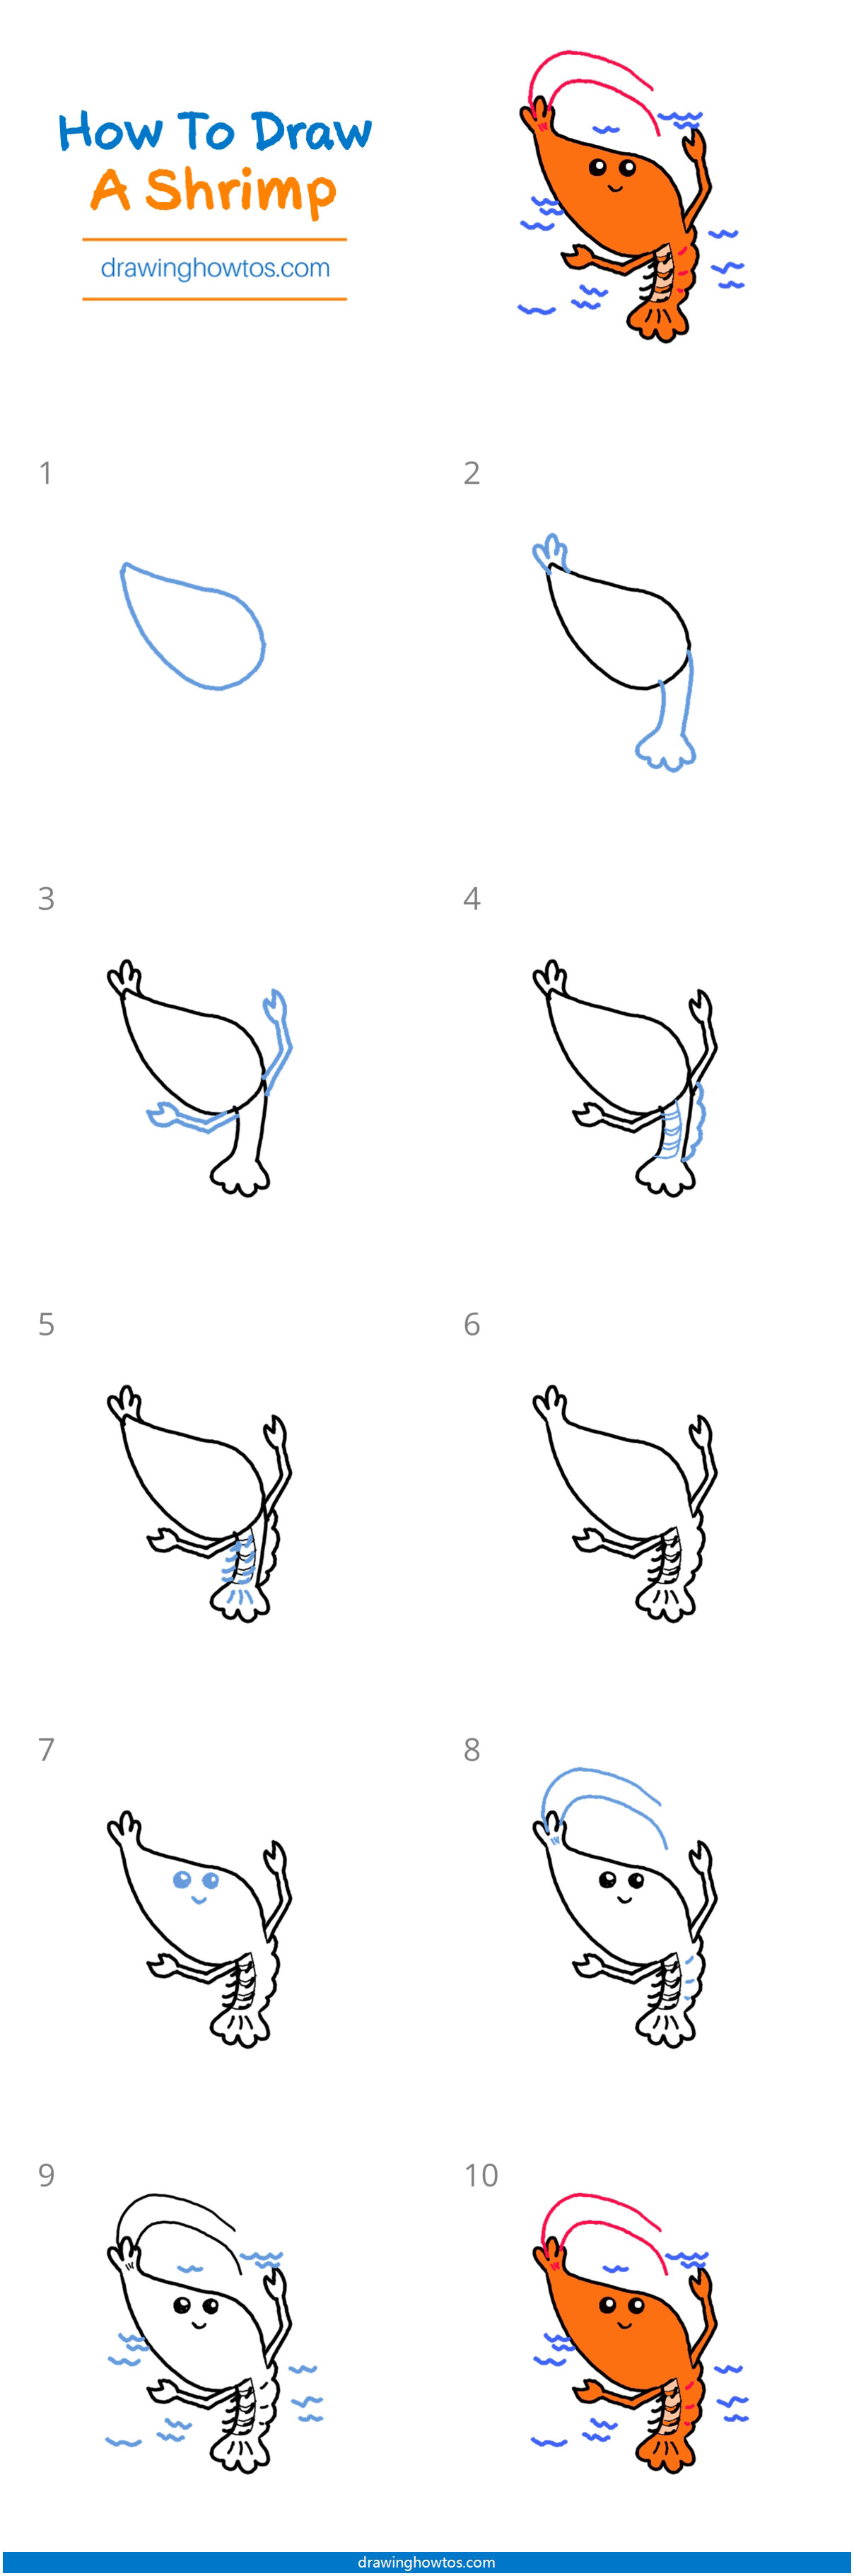 How to Draw a Shrimp - Step by Step Easy Drawing Guides - Drawing Howtos